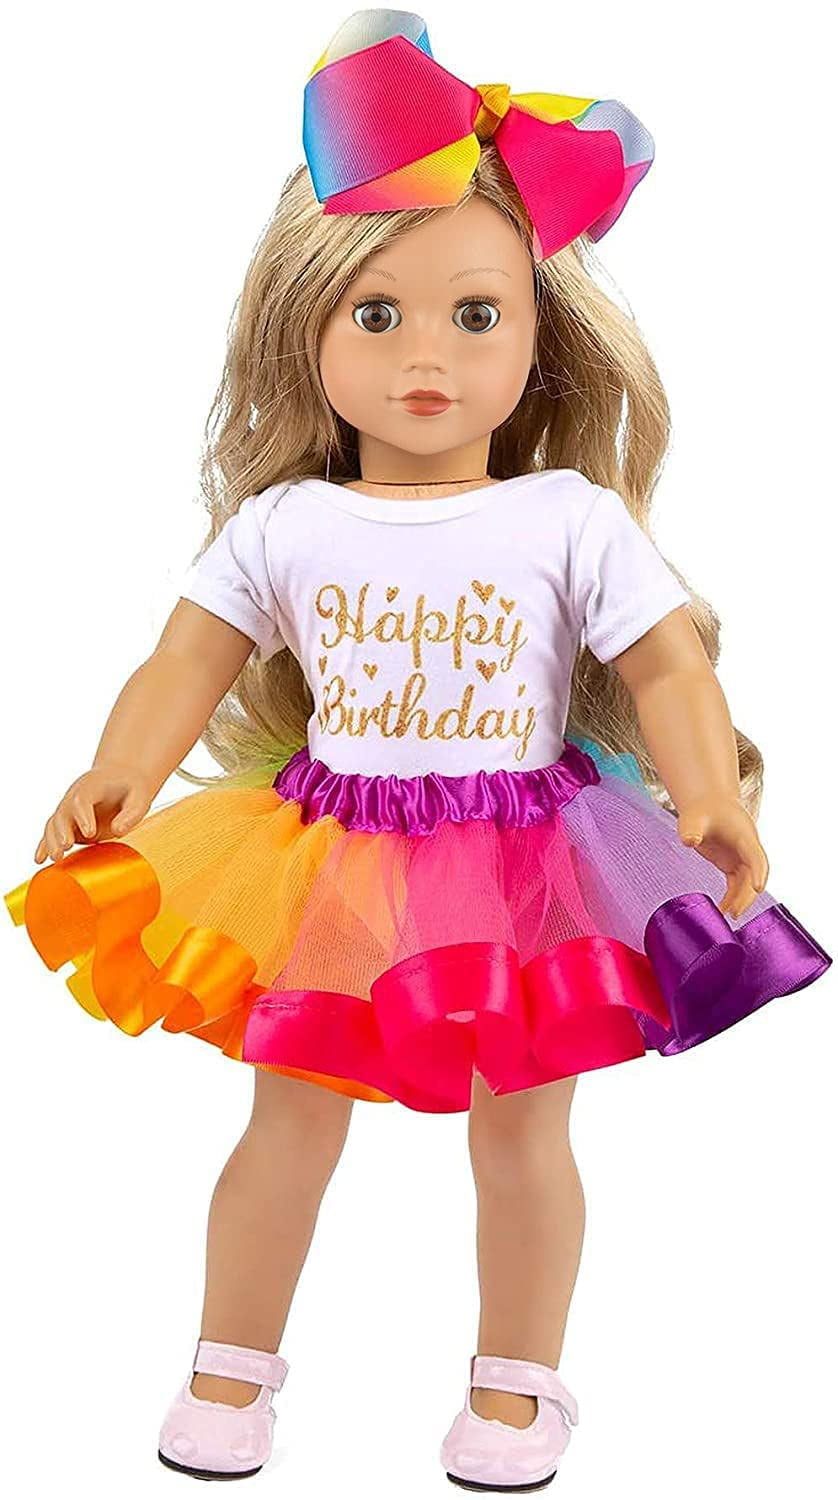 Summer Fashion Tutu Skirt Outfit fit for 18 inch Girl Doll Clothing Accessory